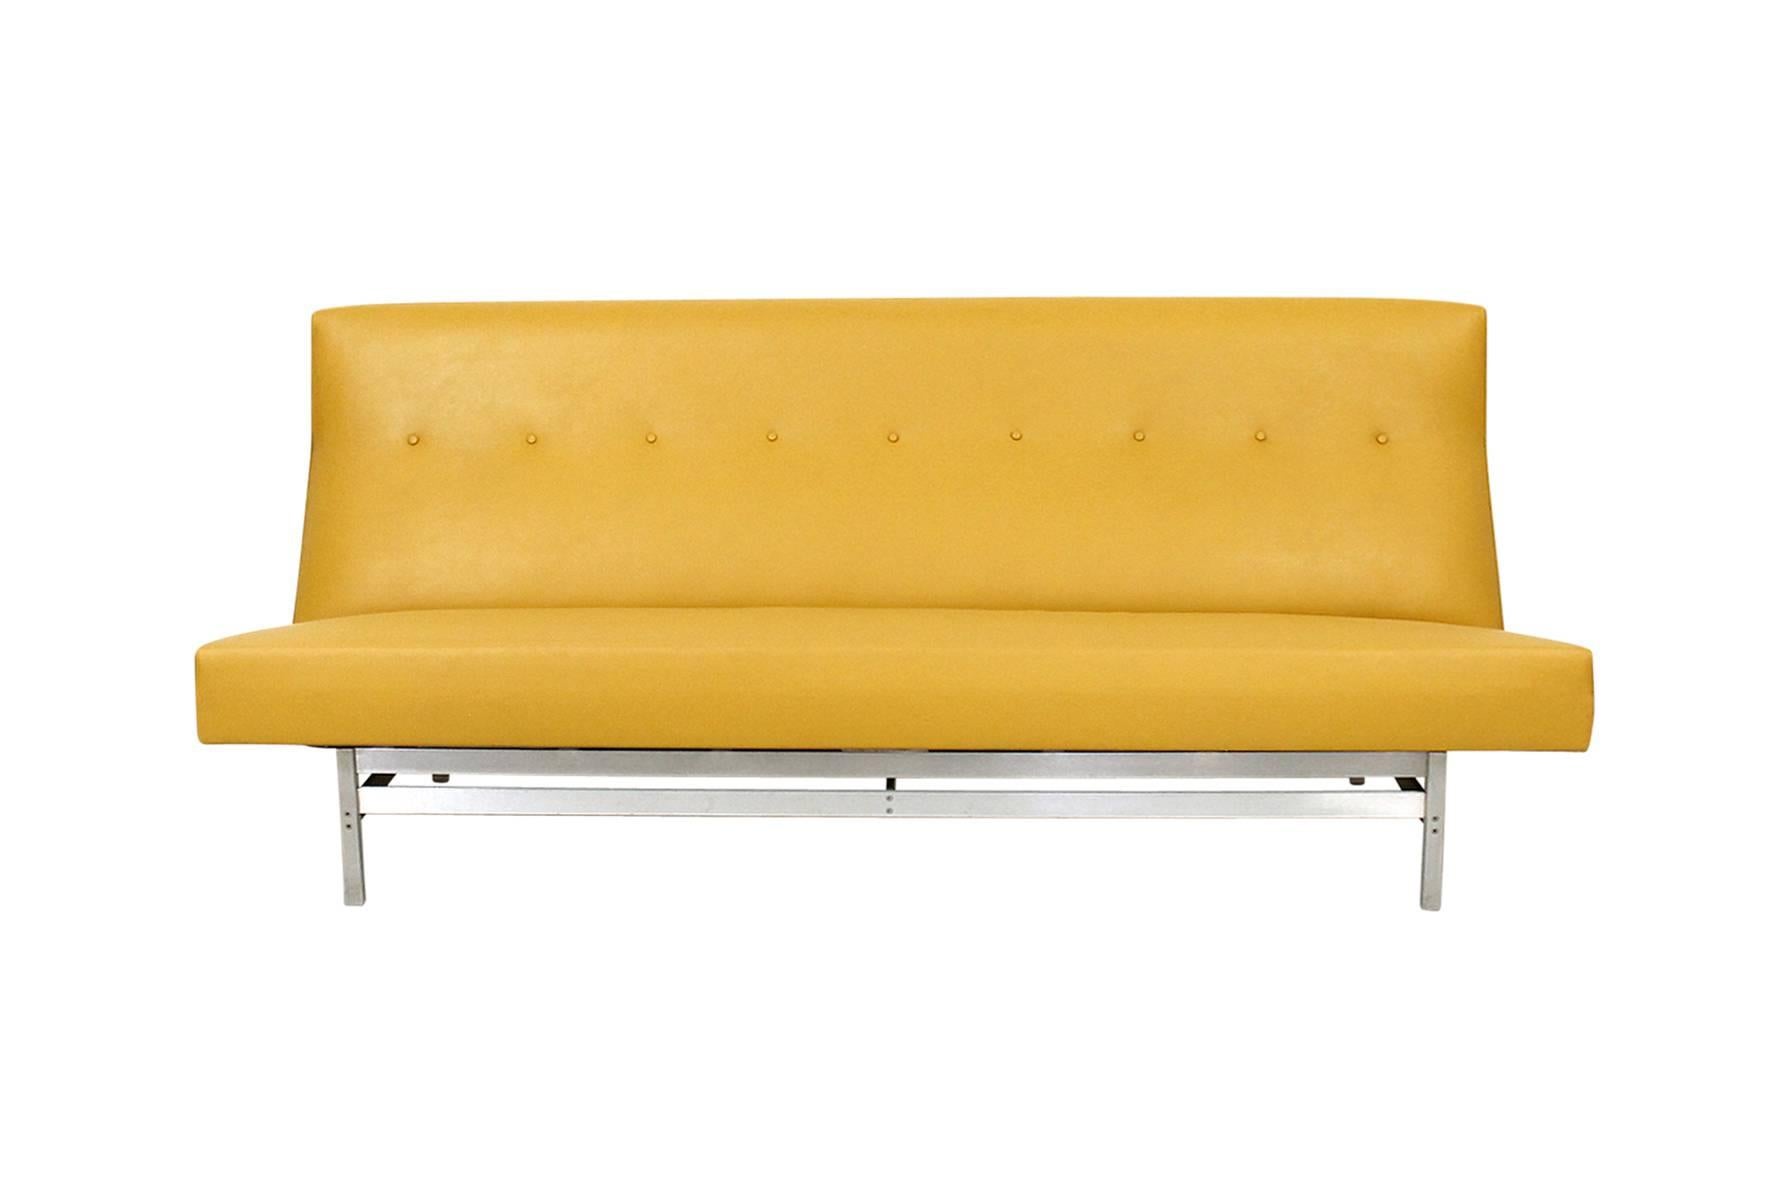 Rare architectural sofa with aluminum base by Jens Risom for Jens Risom Design.